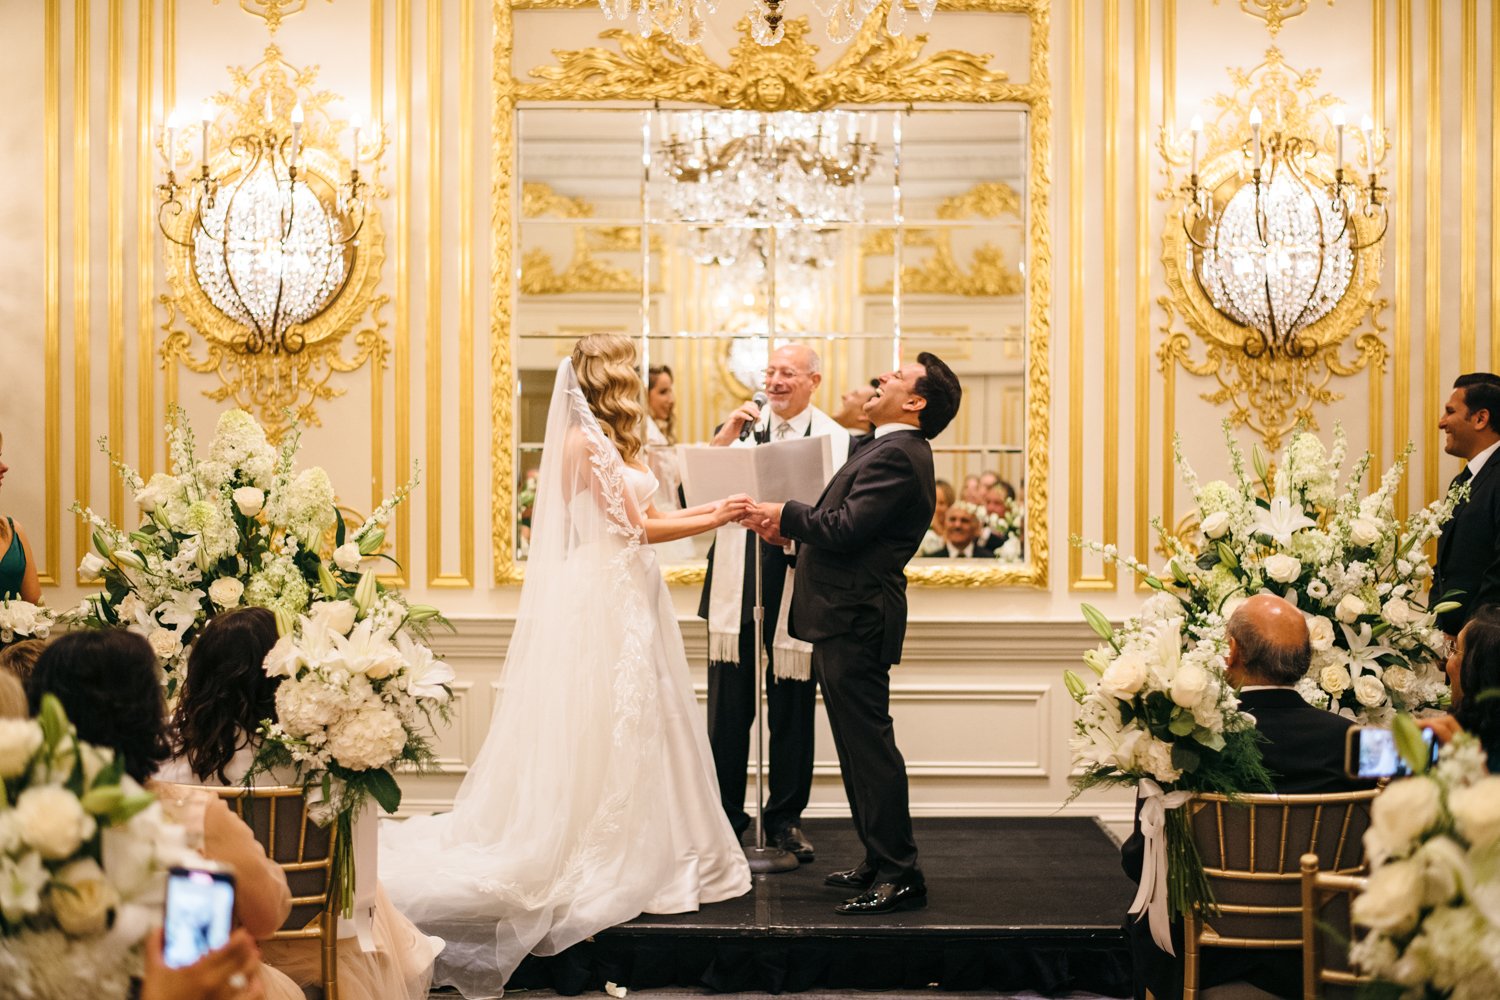 Bride and groom stand at the altar in front of the officiant. They are holding hands and laughing.

Manhattan Luxury Wedding. New York Luxury Wedding Photographer. Wedding in Manhattan. NYC Luxury Wedding.